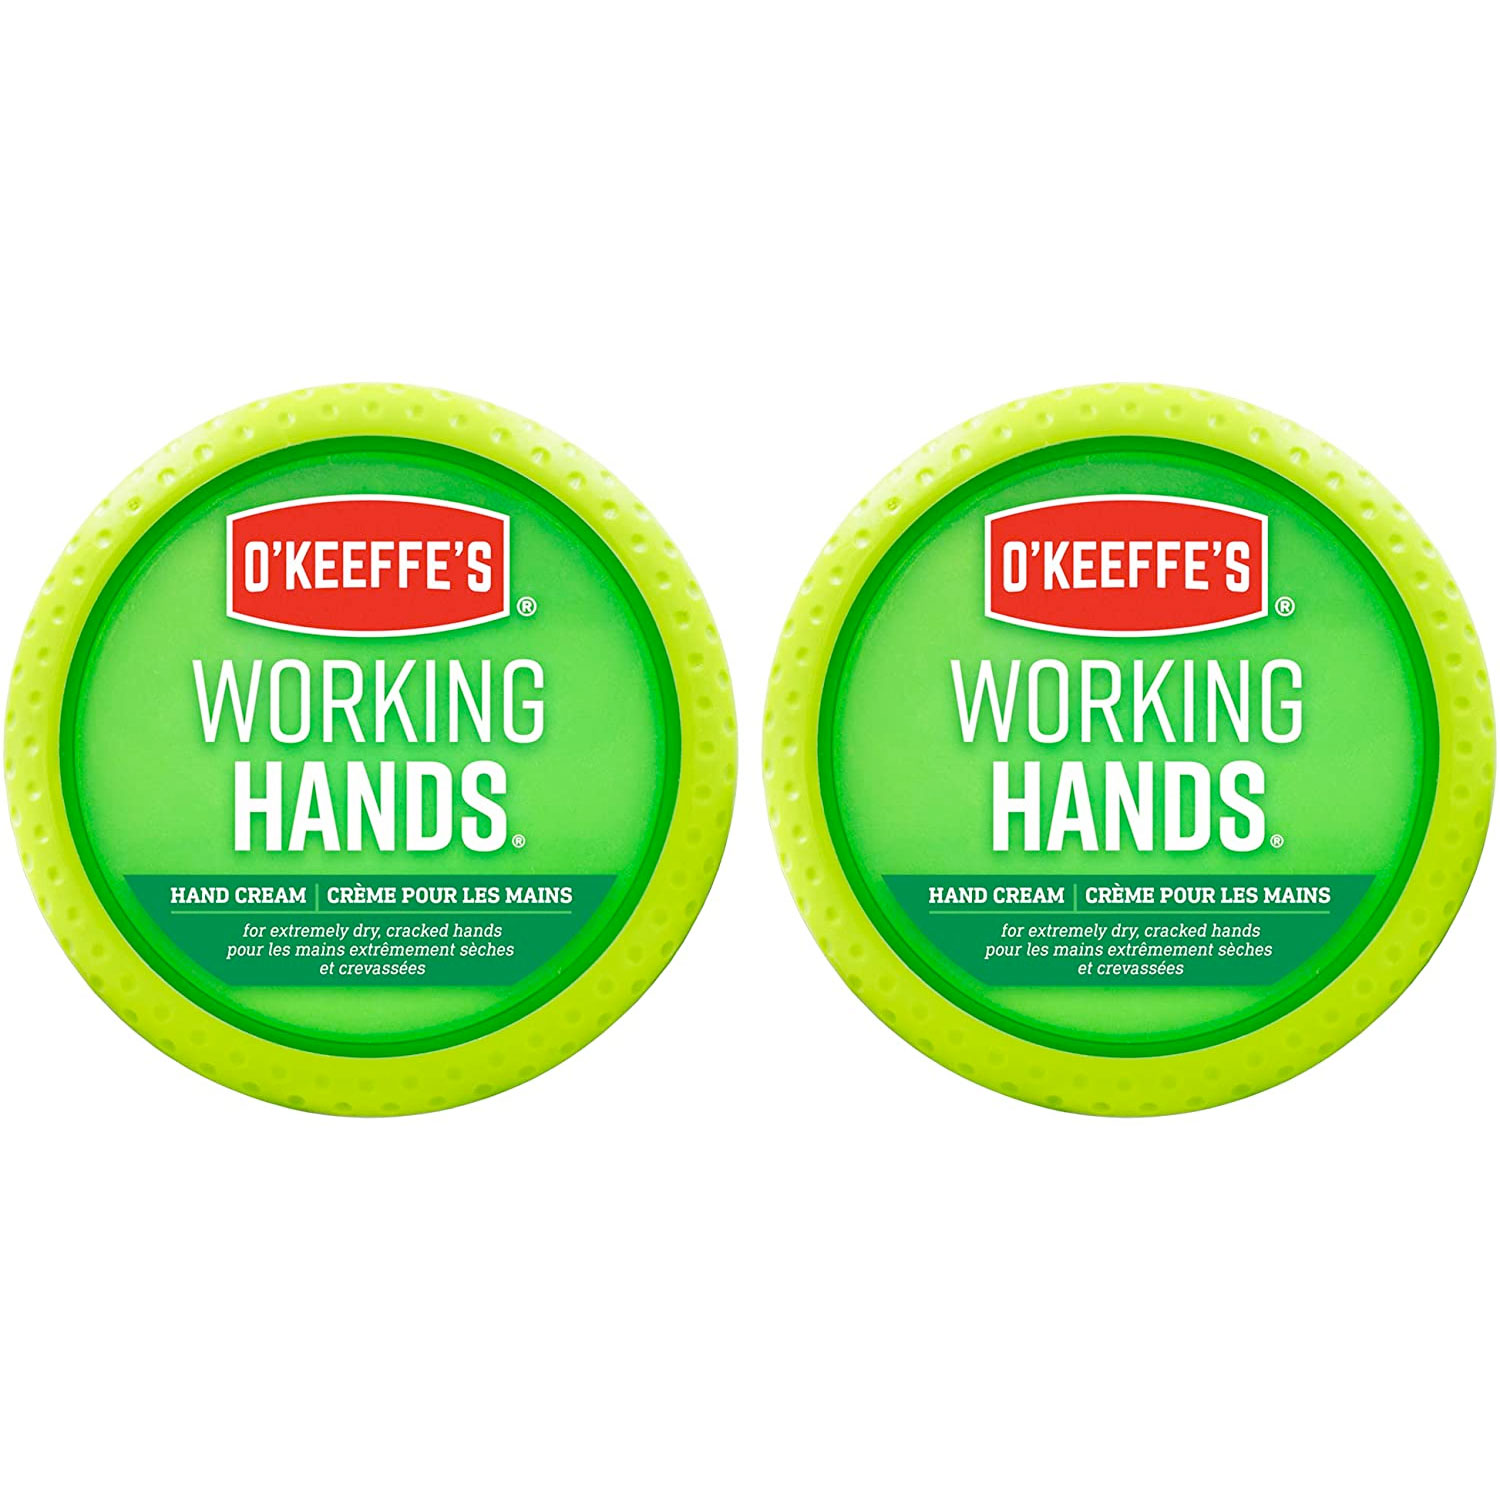 Amazon：O’Keeffe’s Working Hands Hand Cream(96g, Pack of 2)只賣$11.89